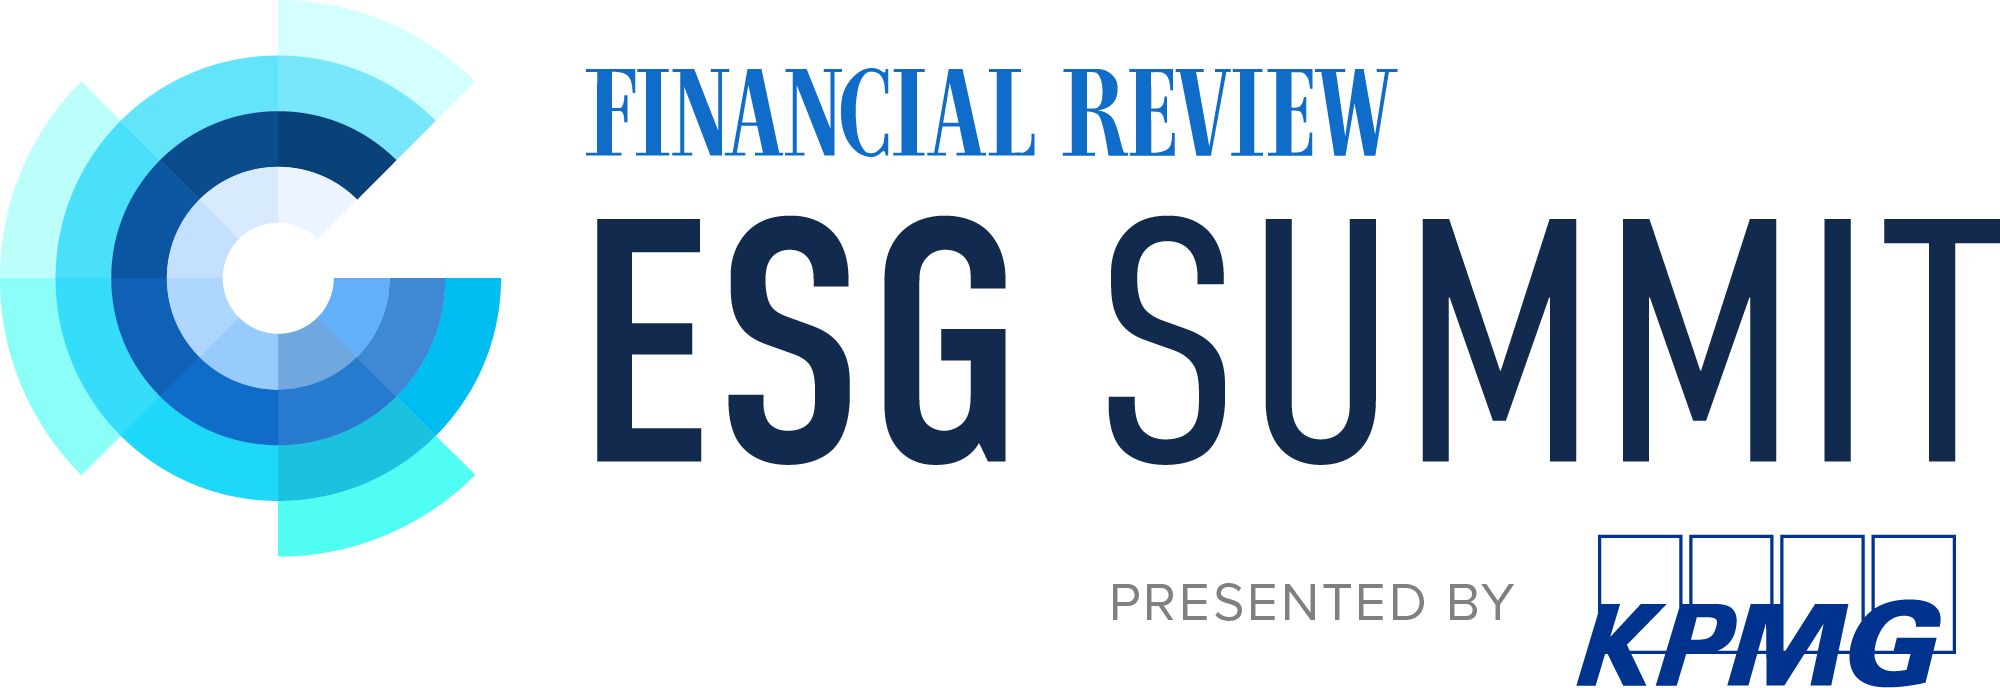 Financial Review ESG Summit presented by KPMG